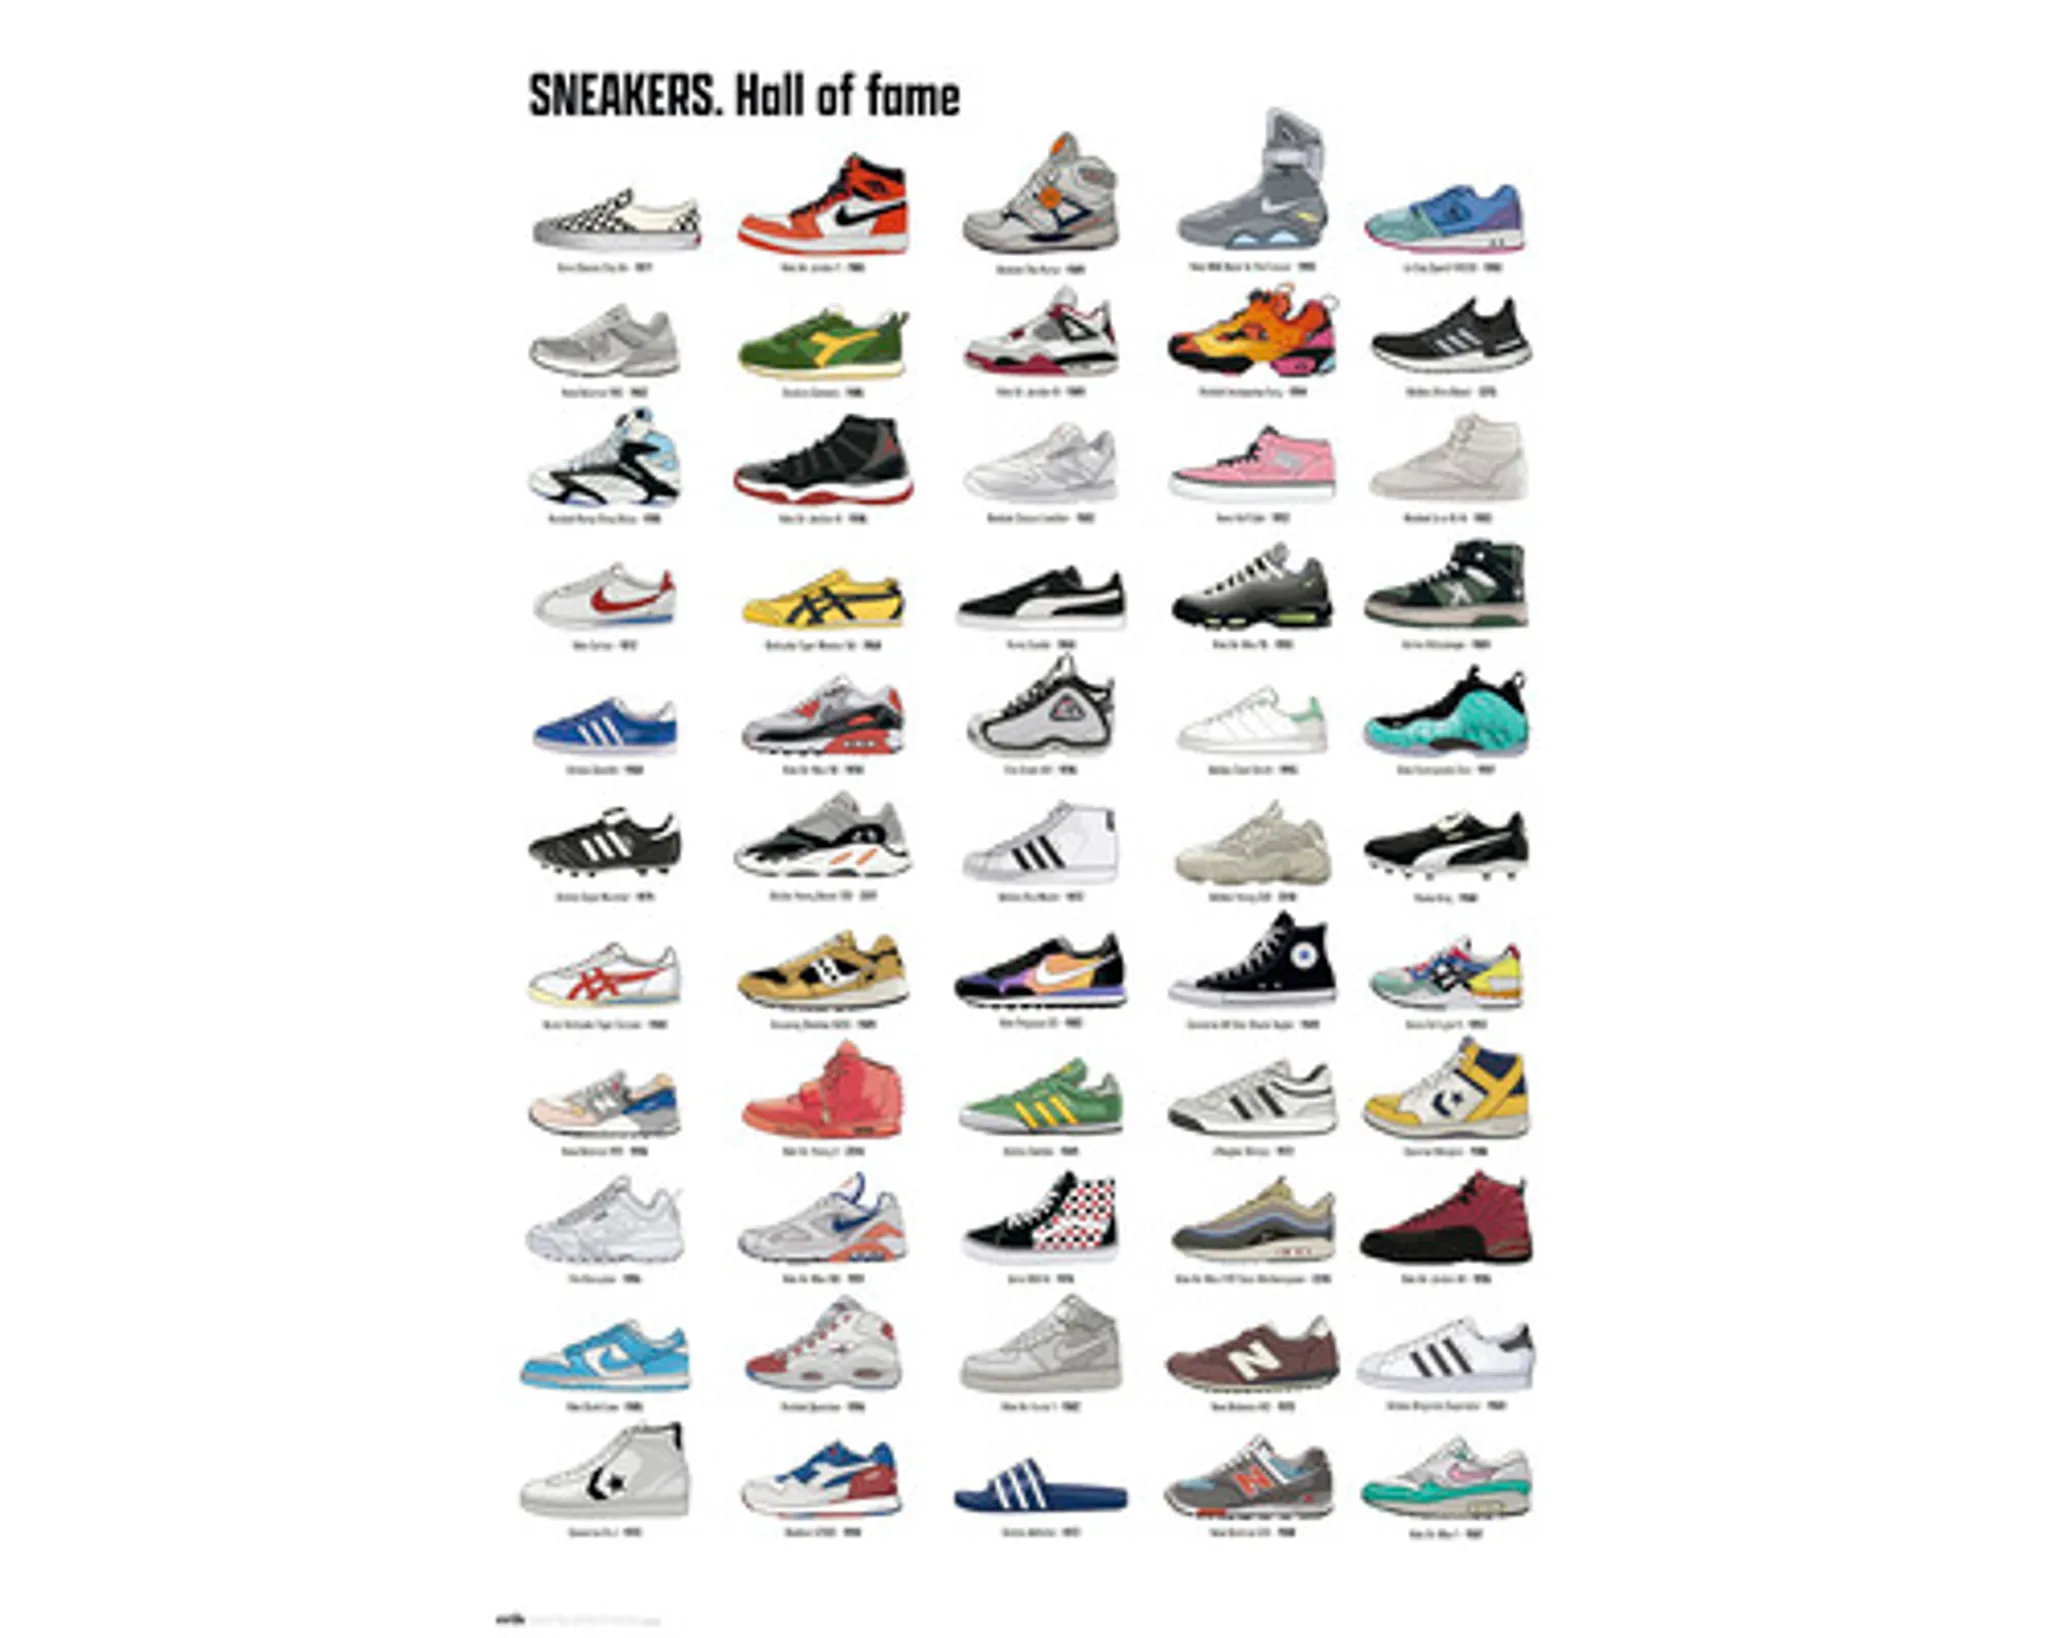 Maxiposter Sneakers hall of cm 61x91,5 fame